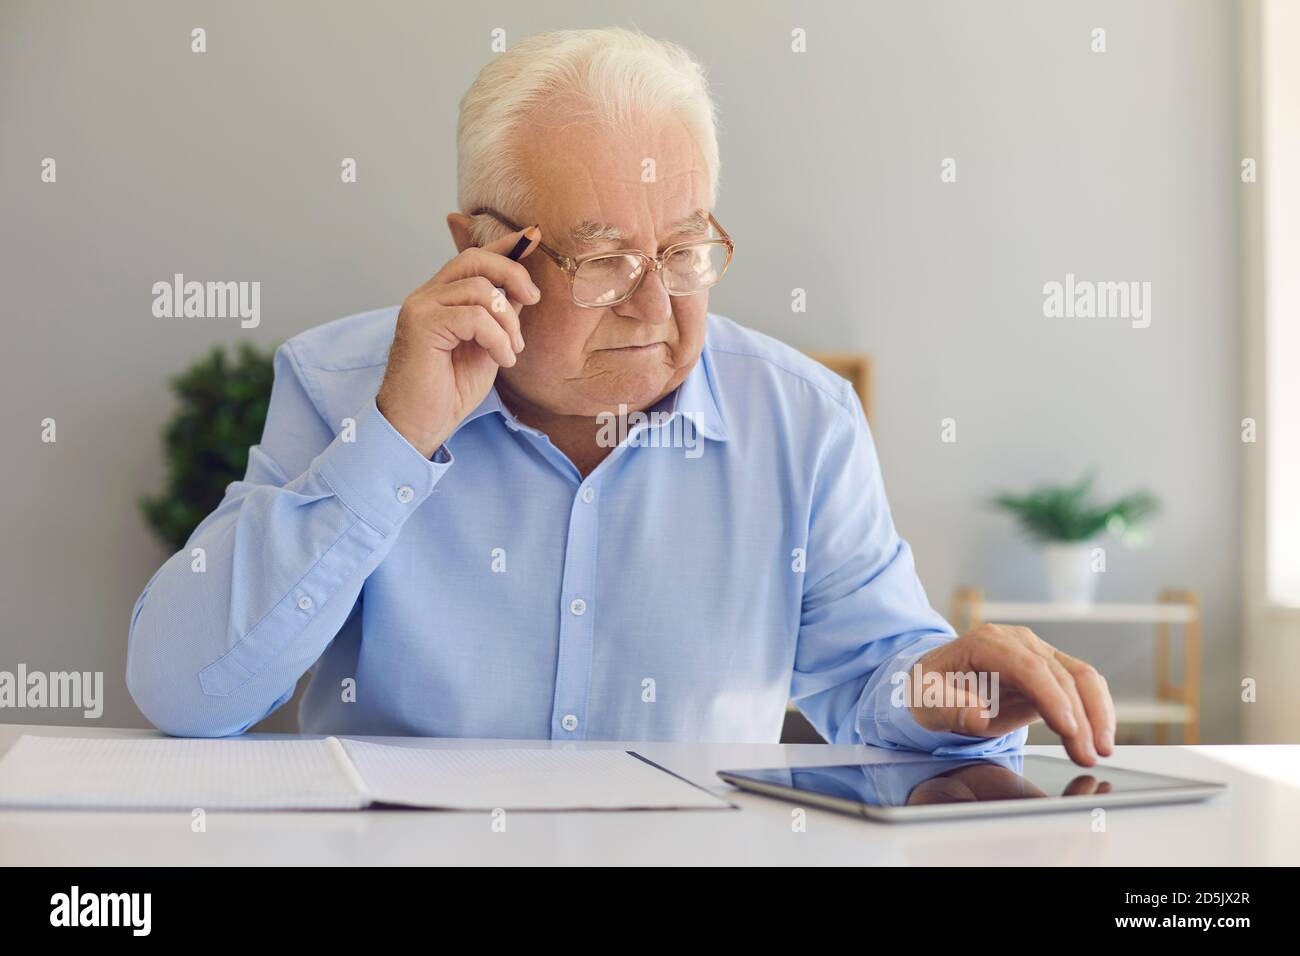 Serious old man sitting at desk at home using tablet computer and taking notes in notebook Stock Photo